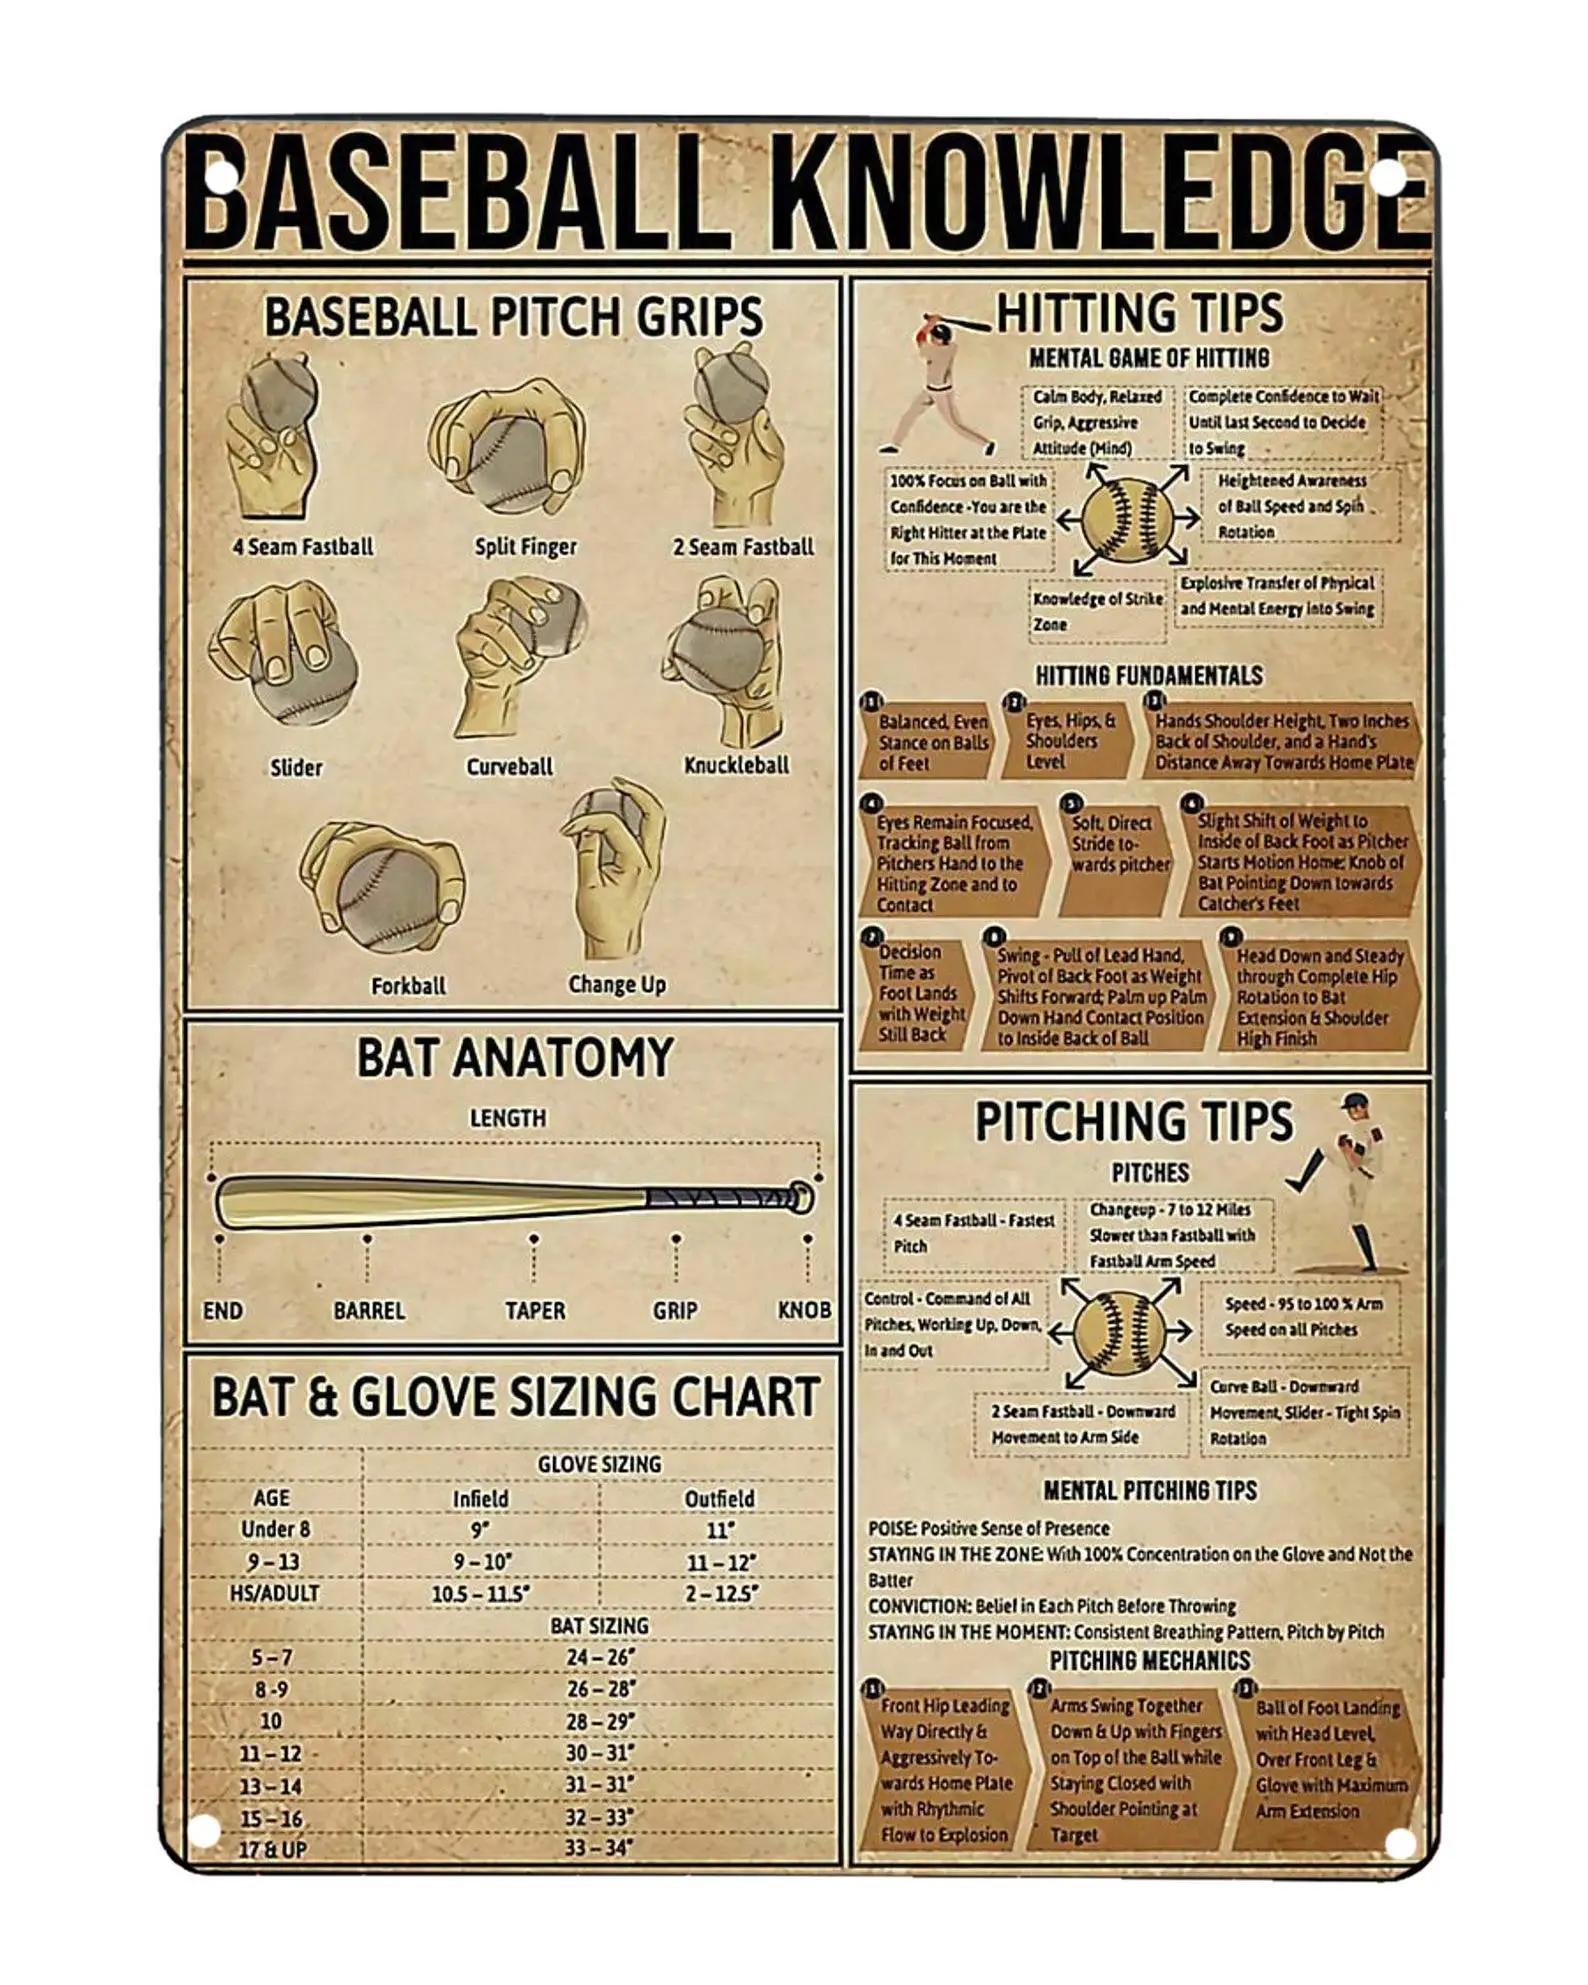 

Retro Vintage Metal Sign Tin Sign Baseball Knowledge Wall Plaque Metal Sign for Bar Cafe Club Plaque 8x12 Inches